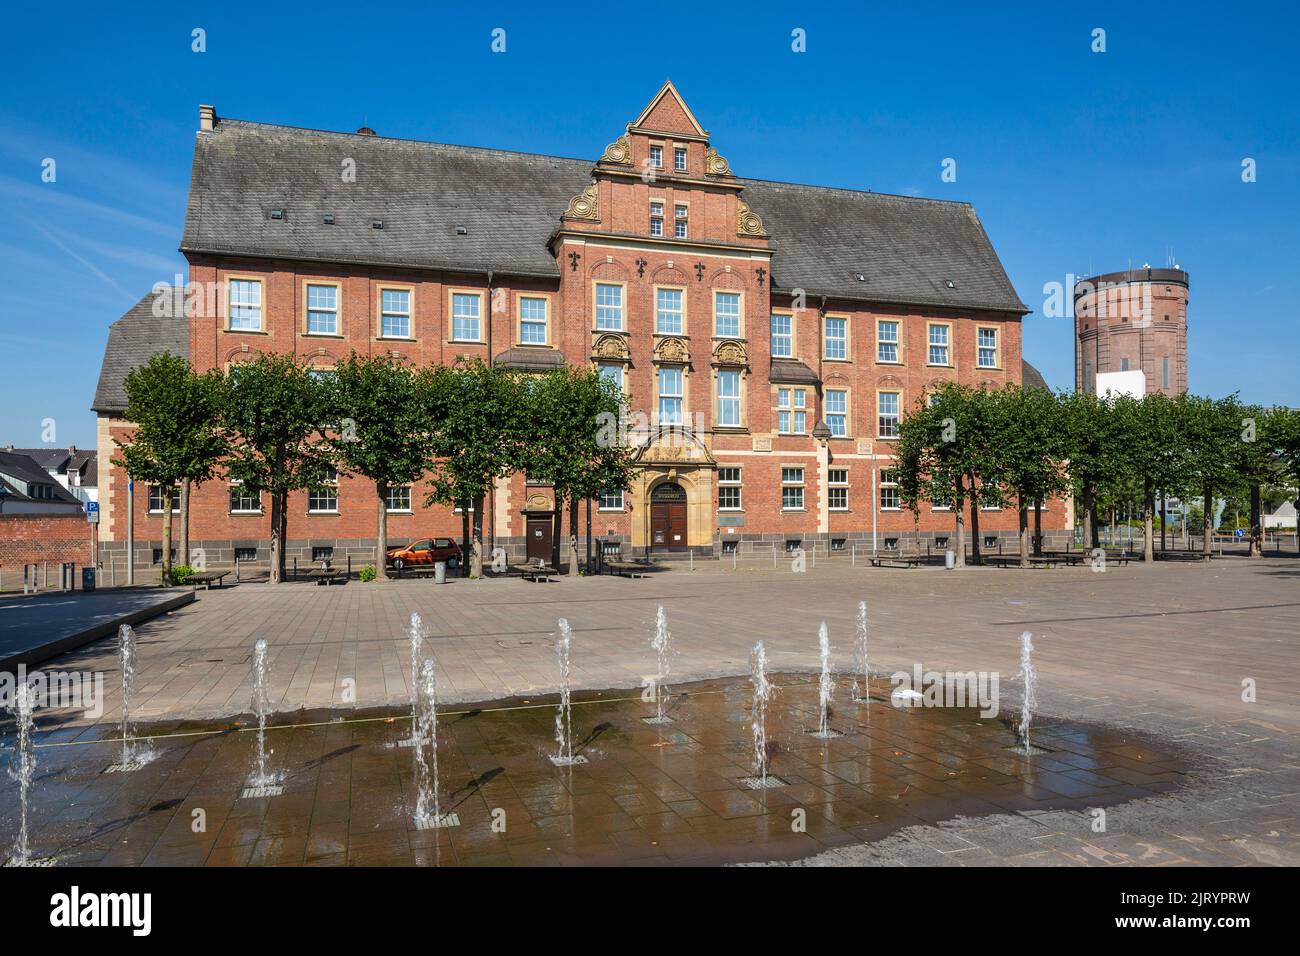 Germany, Bocholt, Lower Rhine, Westmuensterland, Muensterland, Westphalia, North Rhine-Westphalia, NRW, District Court Building Bocholt at the Benoelkenplatz, responsible for Bocholt and Rhede and Isselburg, brick building, spring, trick fountains, behind the water tower, Intze tower Stock Photo